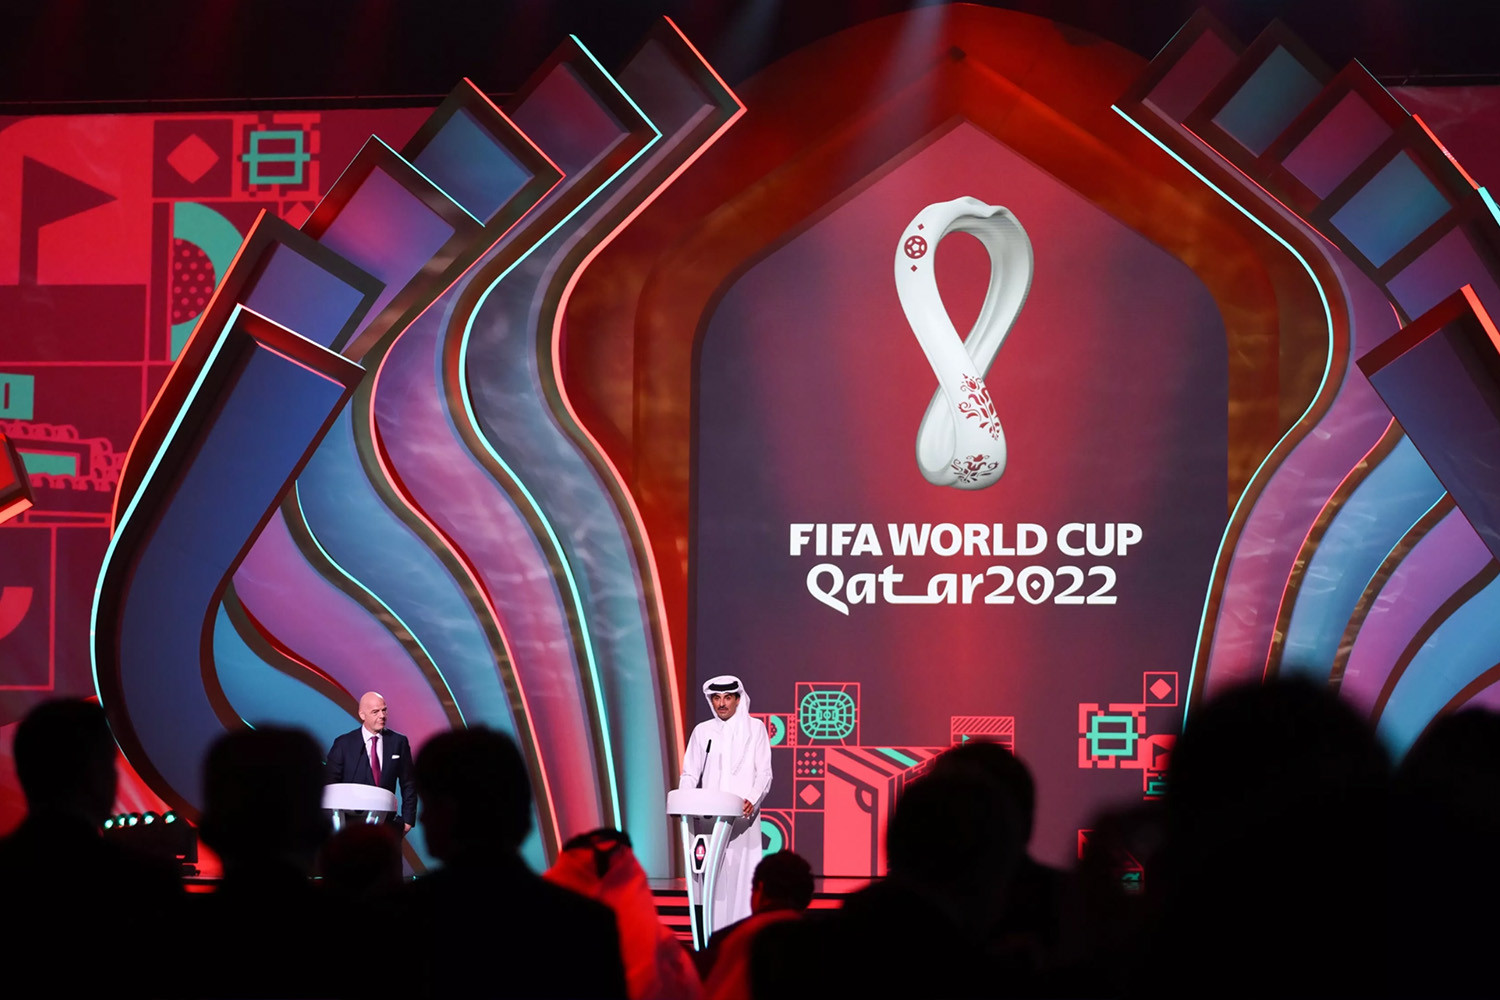 Qatar minister accuses Germany of 'double standards' in World Cup criticism